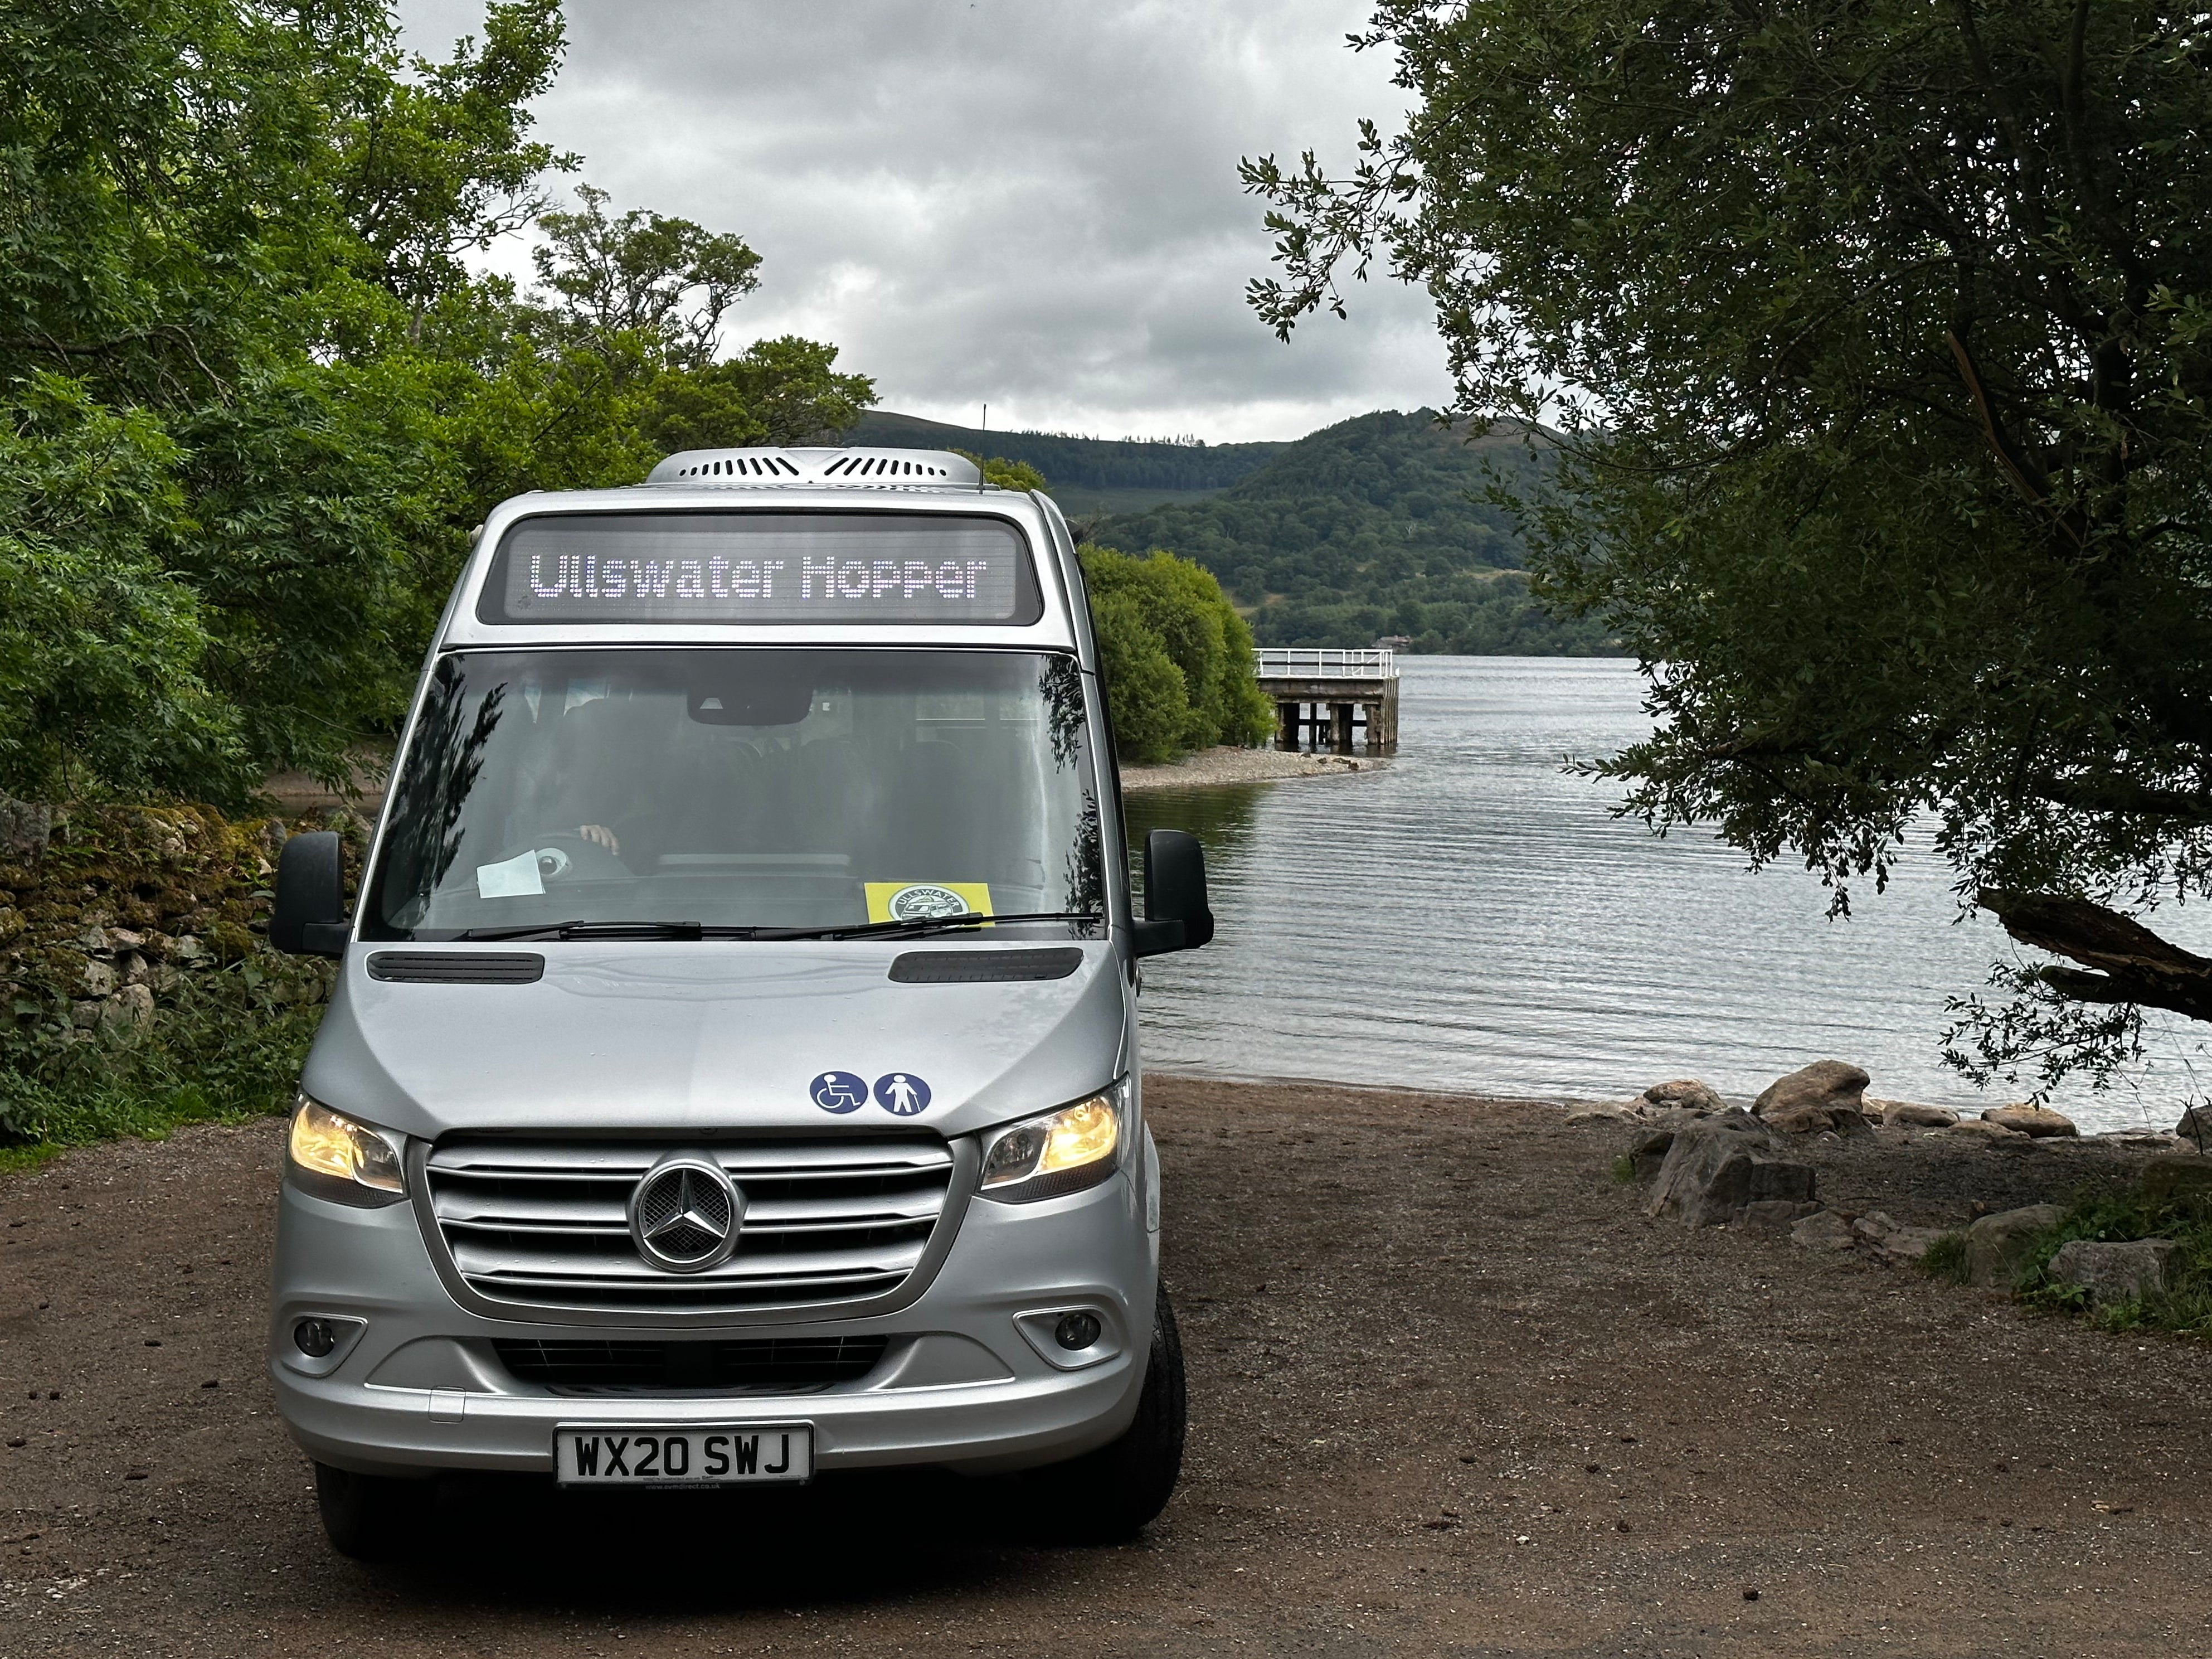 Hop on board the Ullswater bus service aimed squarely at getting tourists out of cars